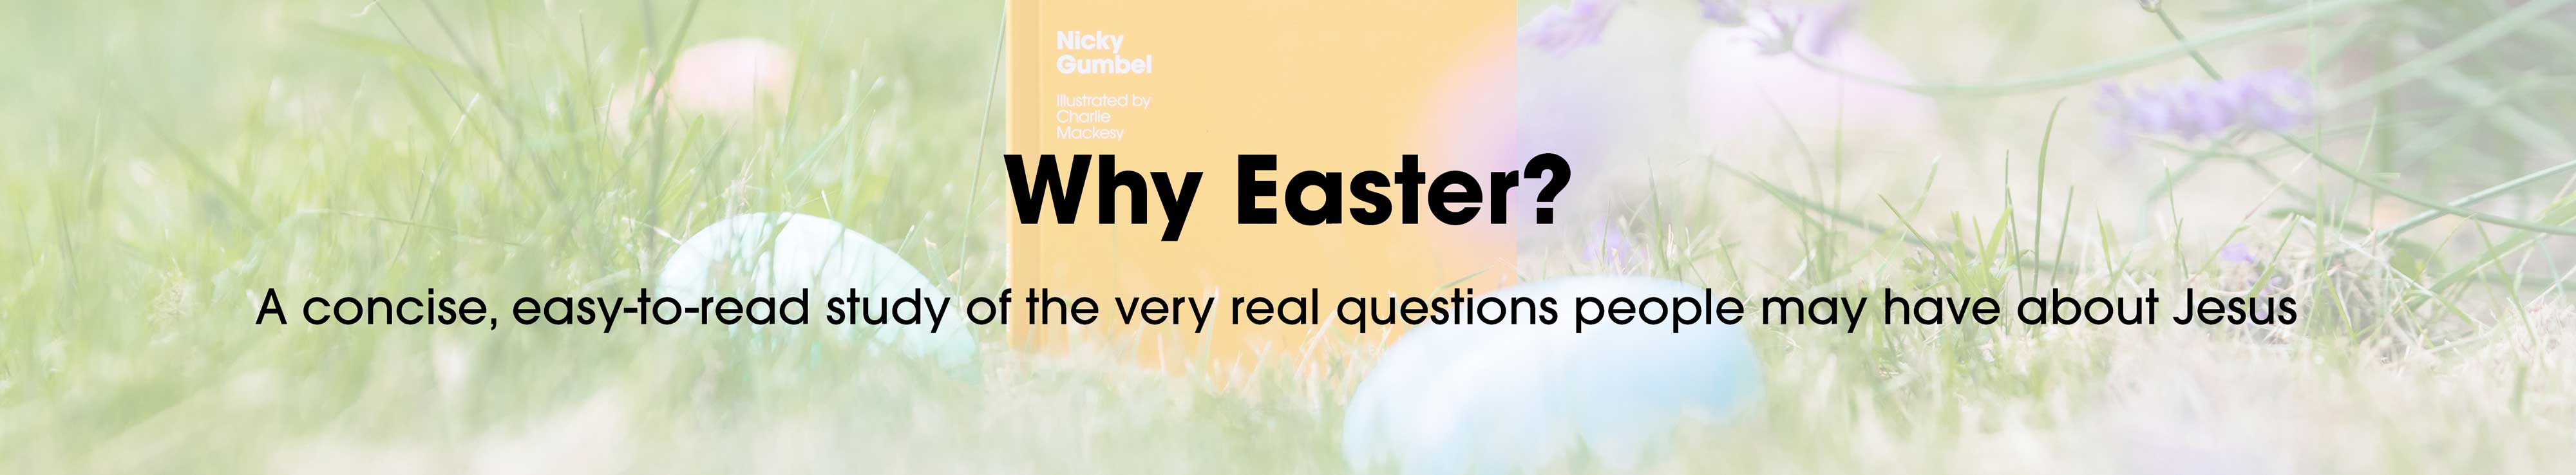 Why-Easter